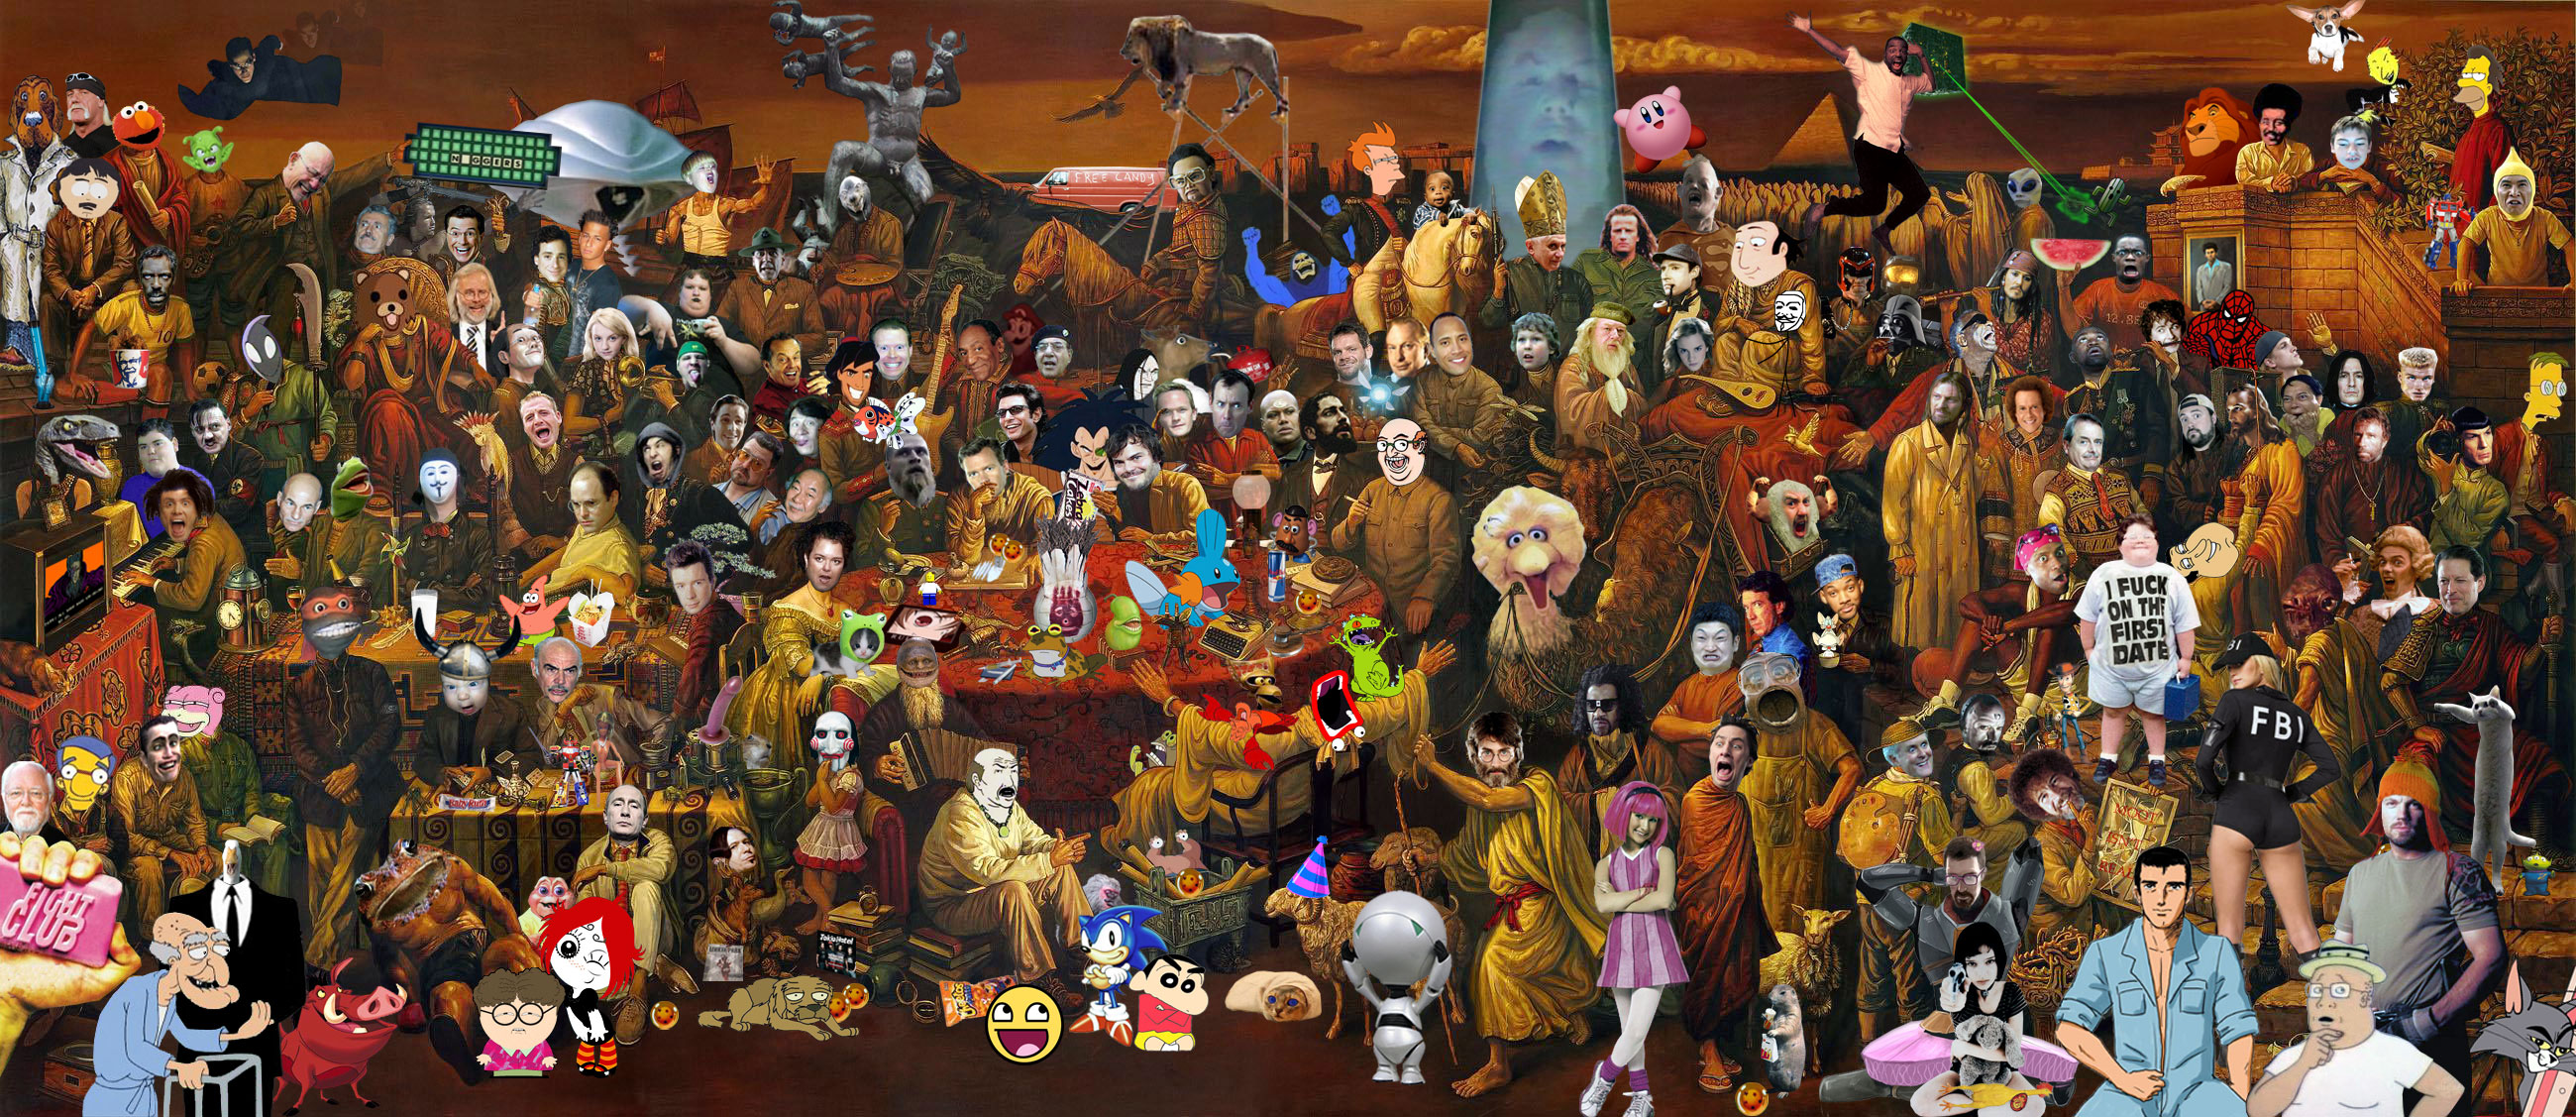 recent wallpaper, people, collection, crowd, animated cartoon, art